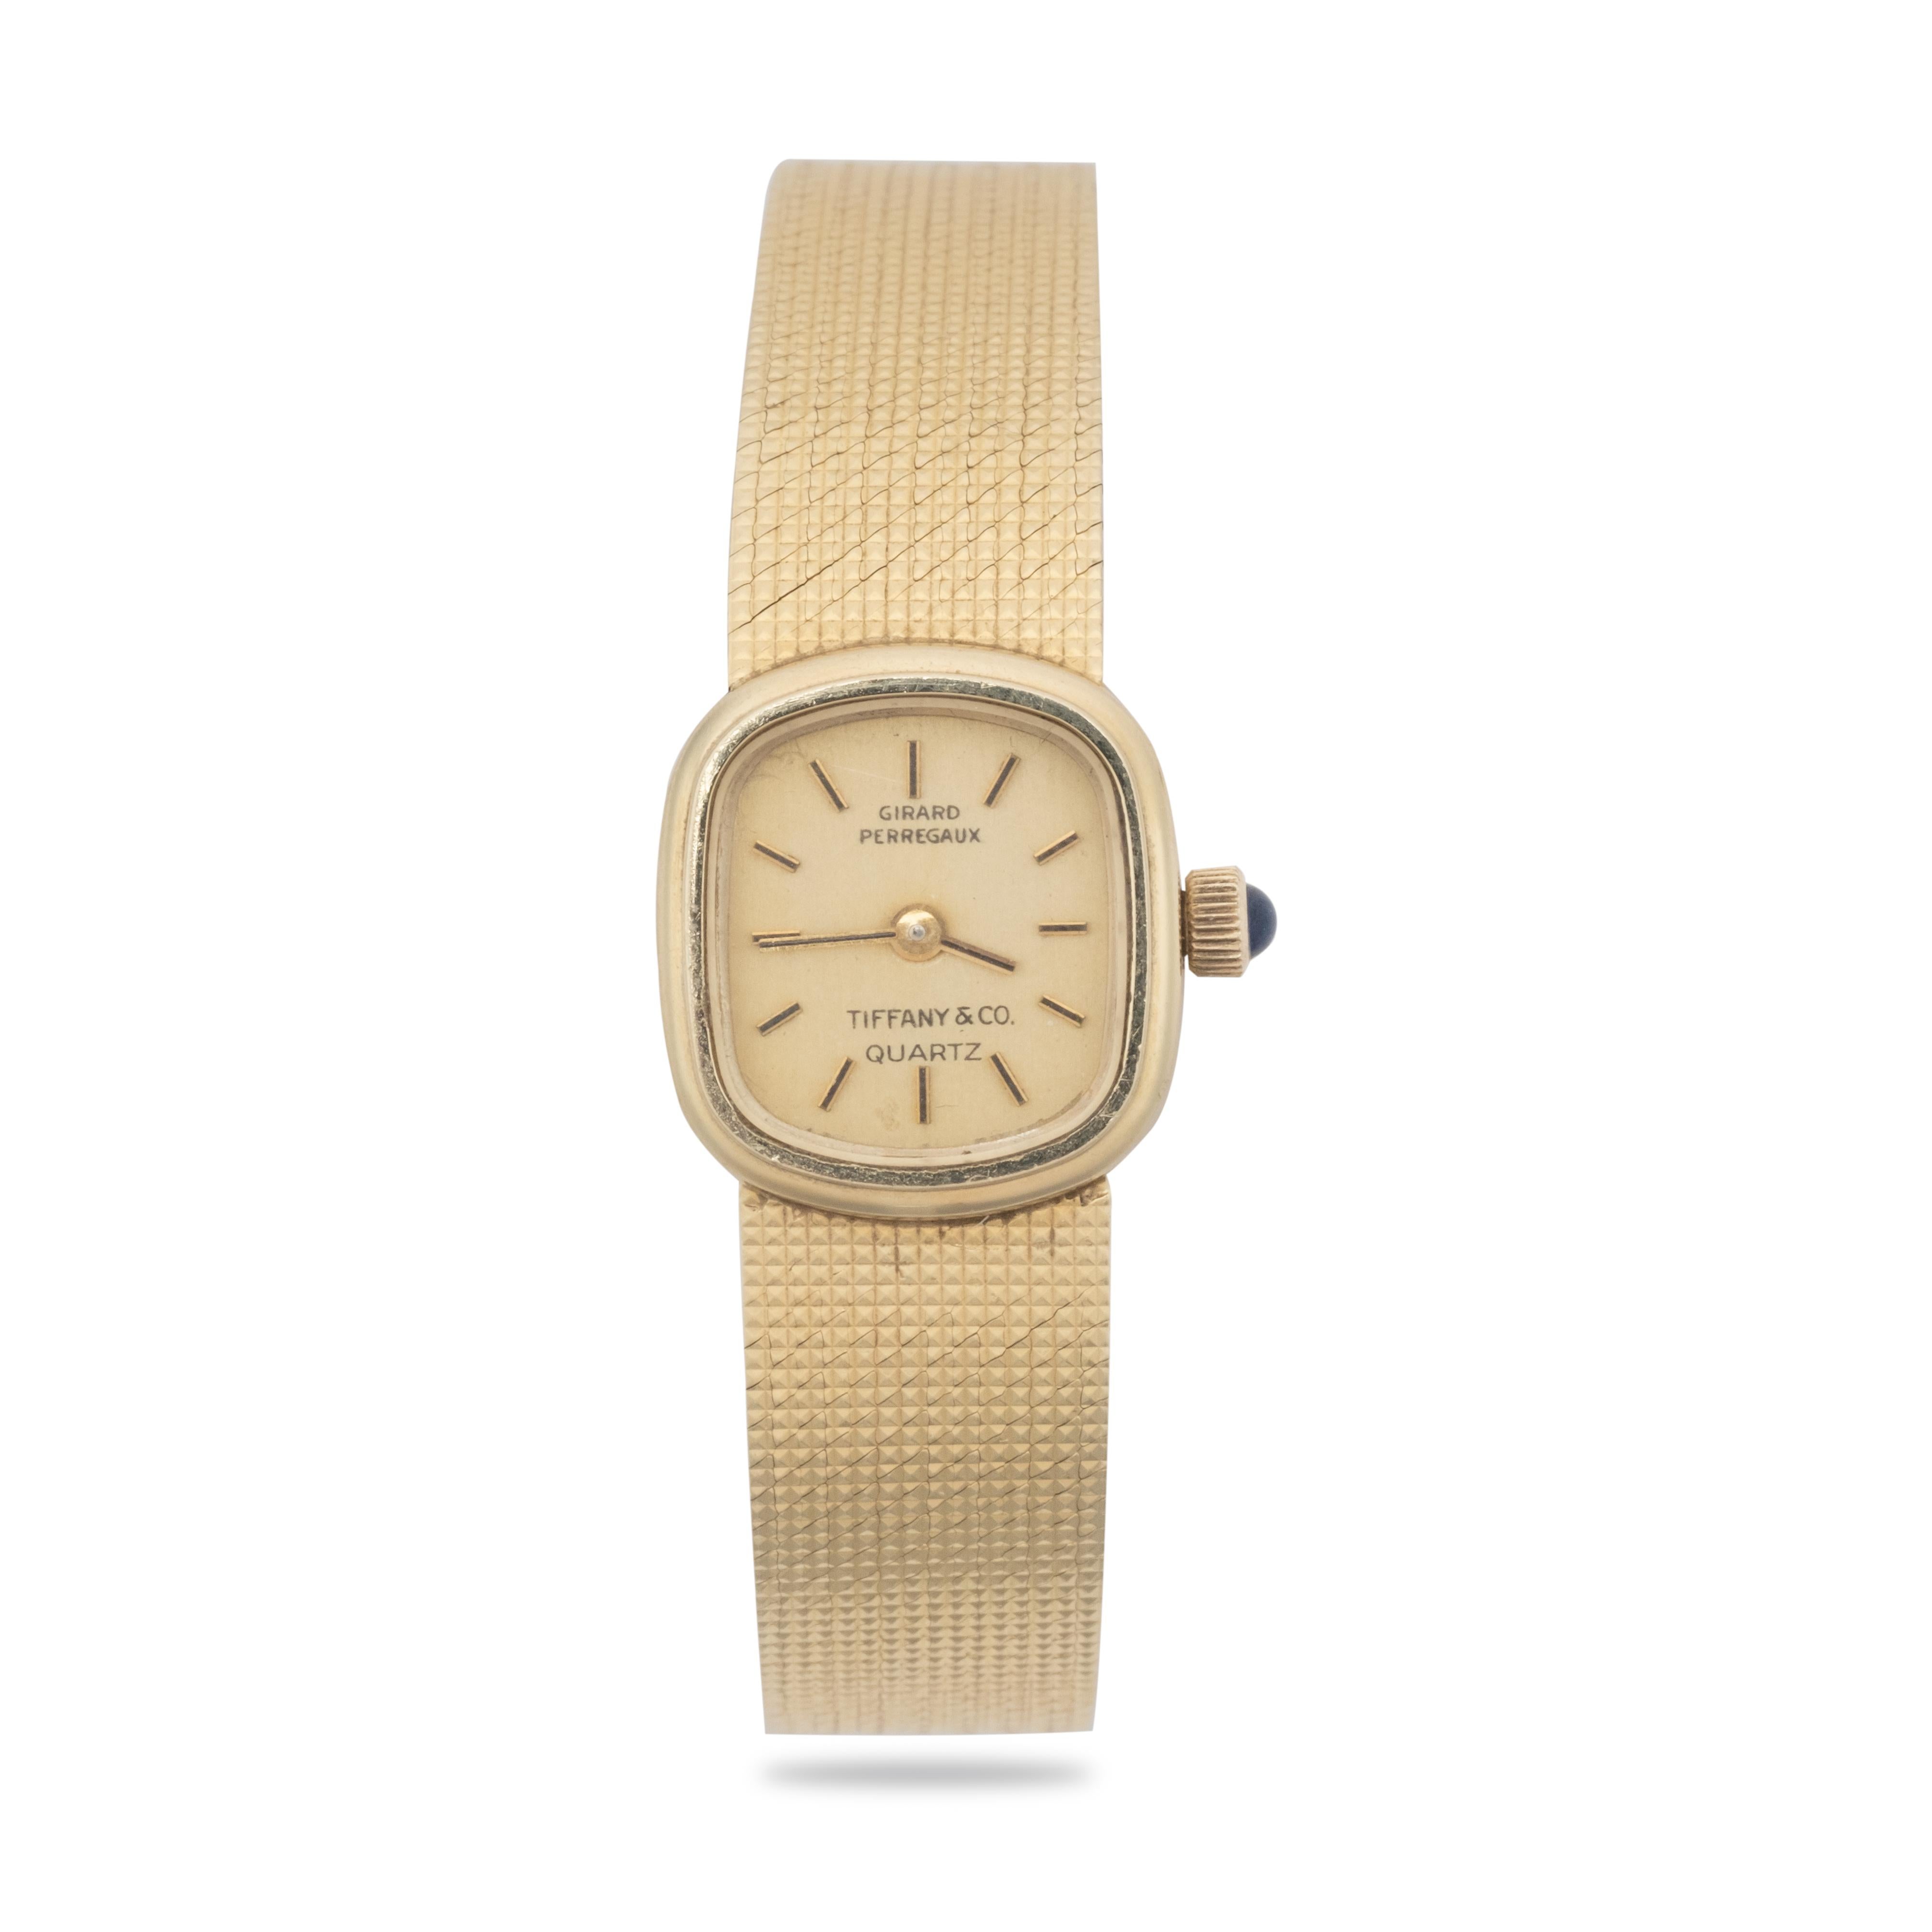 Vintage 14k gold ladies wristwatch made in collaboration of Tiffany & Co. and Girard-Perregaux. Square yellow dial with baton indexes, inscription Tiffany and Co., Girard Perregaux Quartz. The watch has a mesh bracelet with a clasp lock. Hallmark